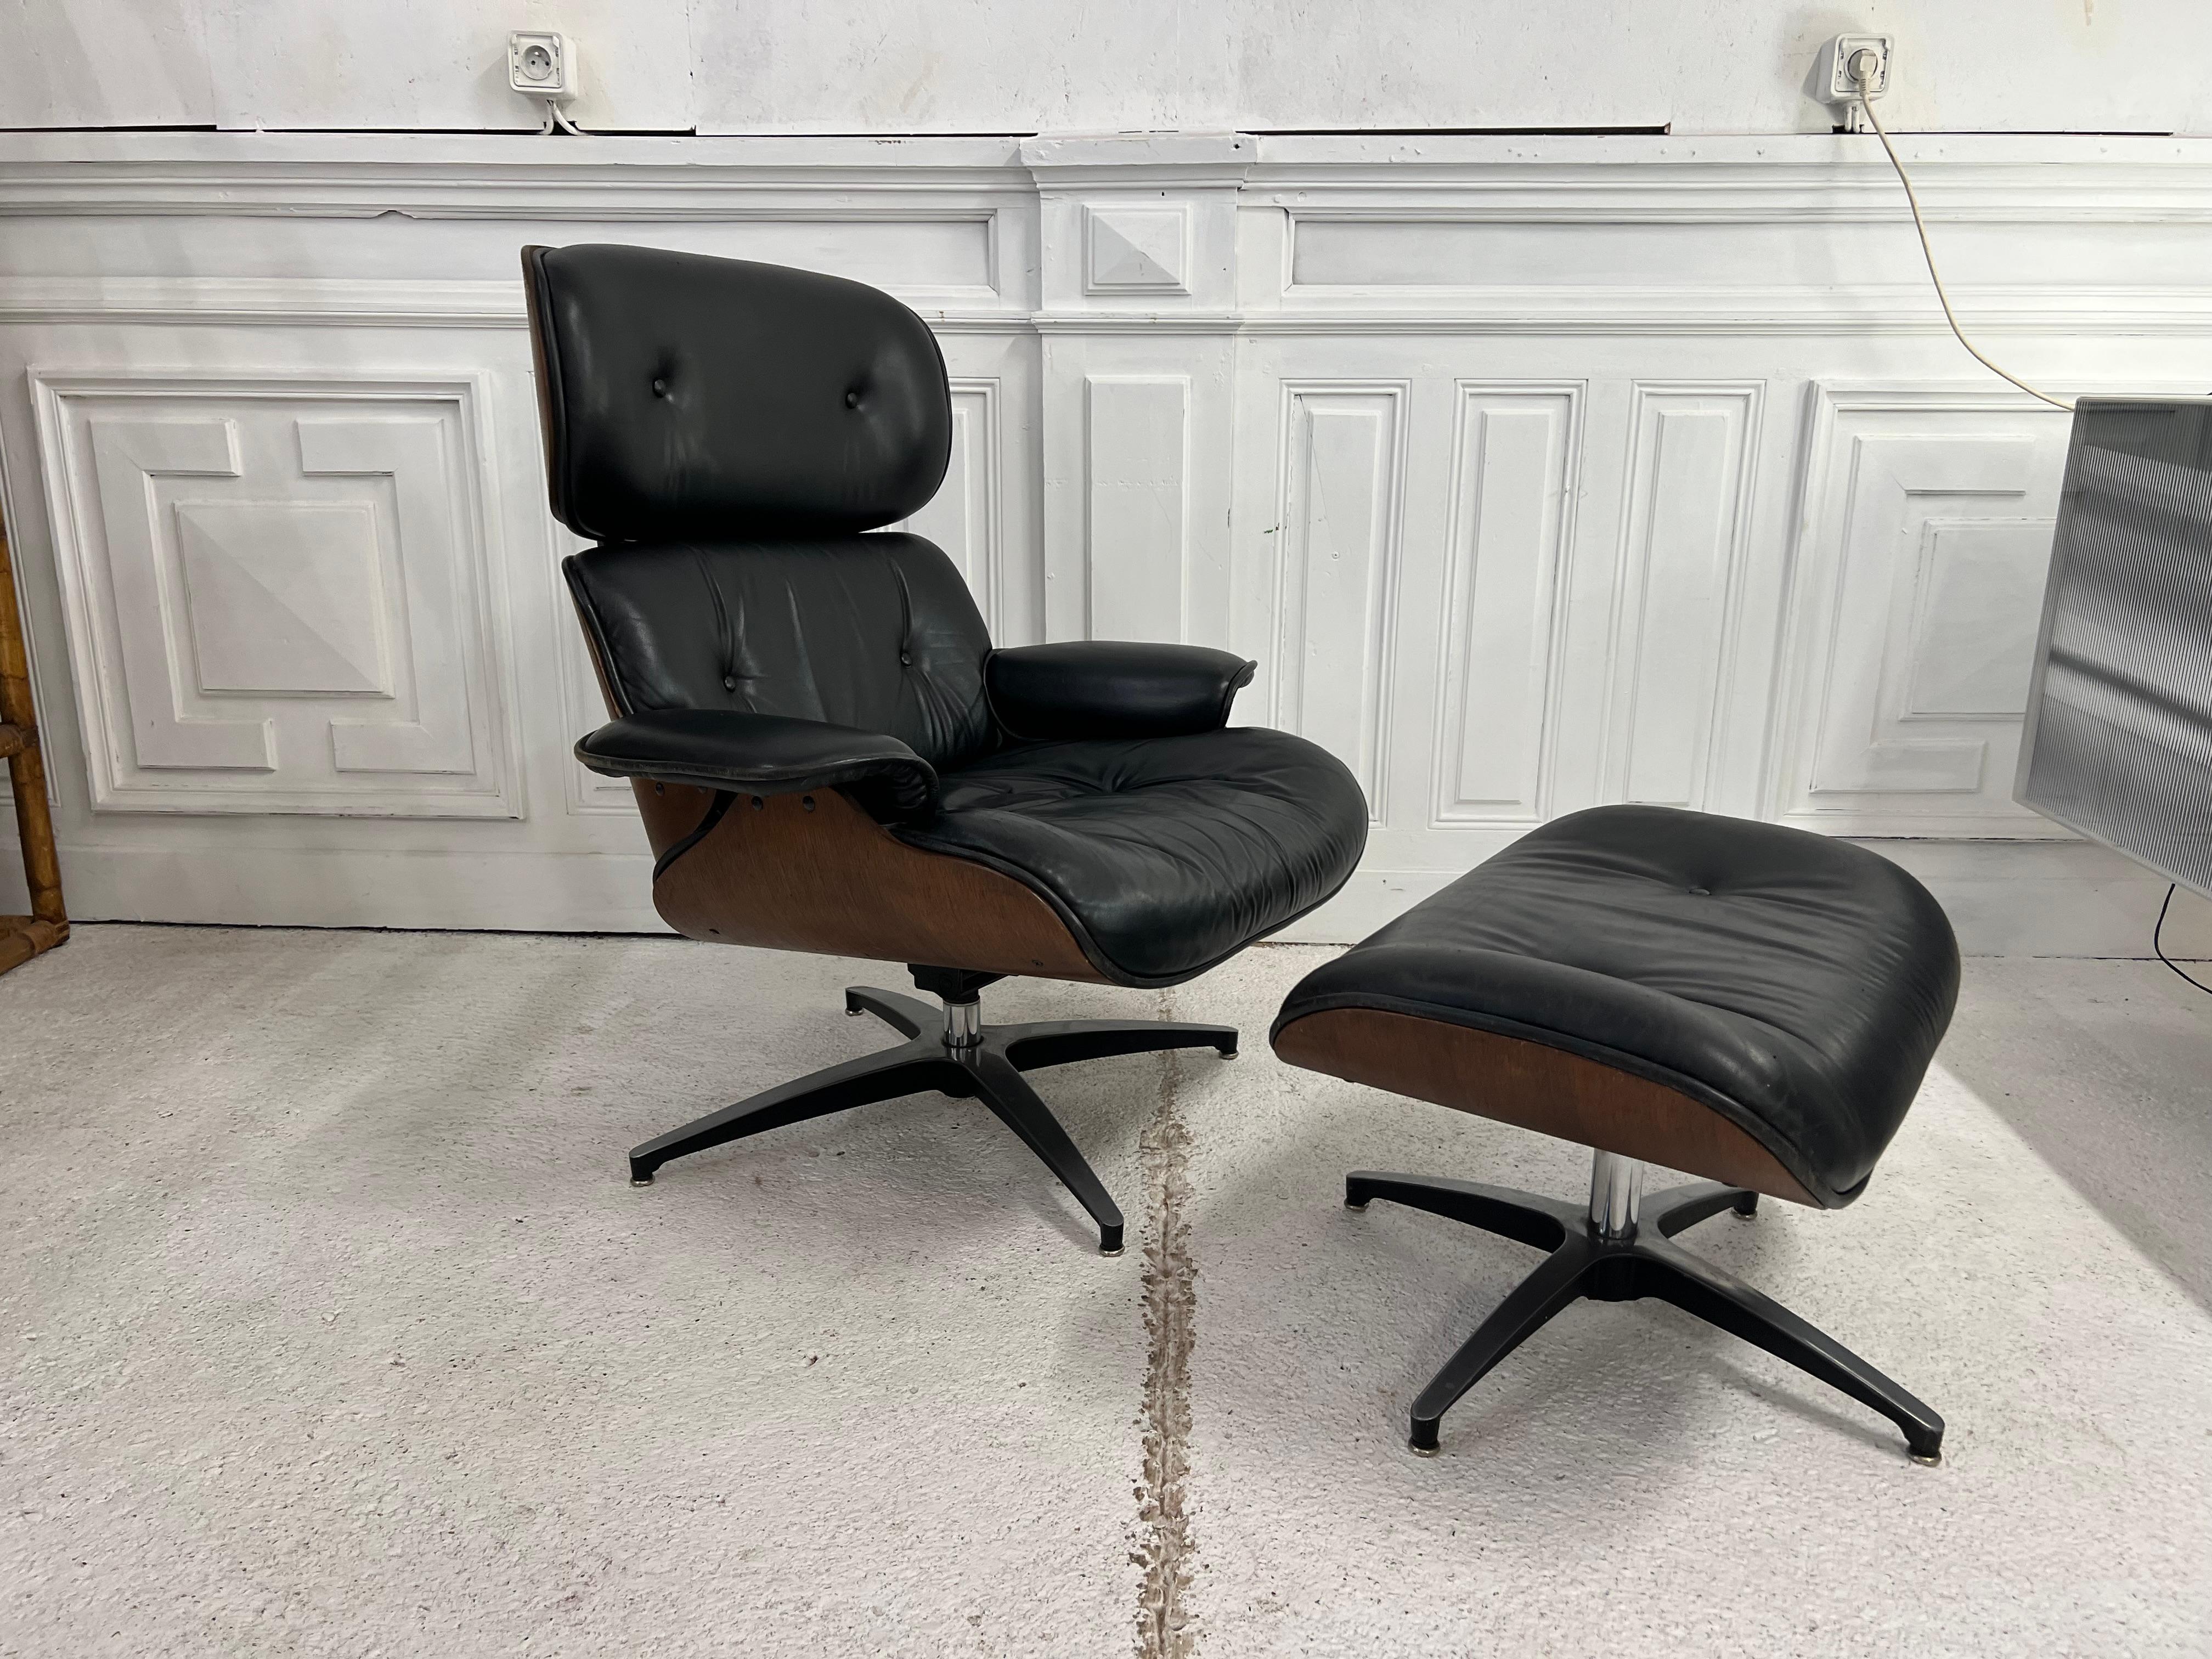 magnificent lounge chair in black leather with its flex system for the backrest allowing absolute comfort
the armchair is accompanied by its ottoman
Charles Ormond Eames Jr., known as Charles Eames, is an American designer, architect and filmmaker,